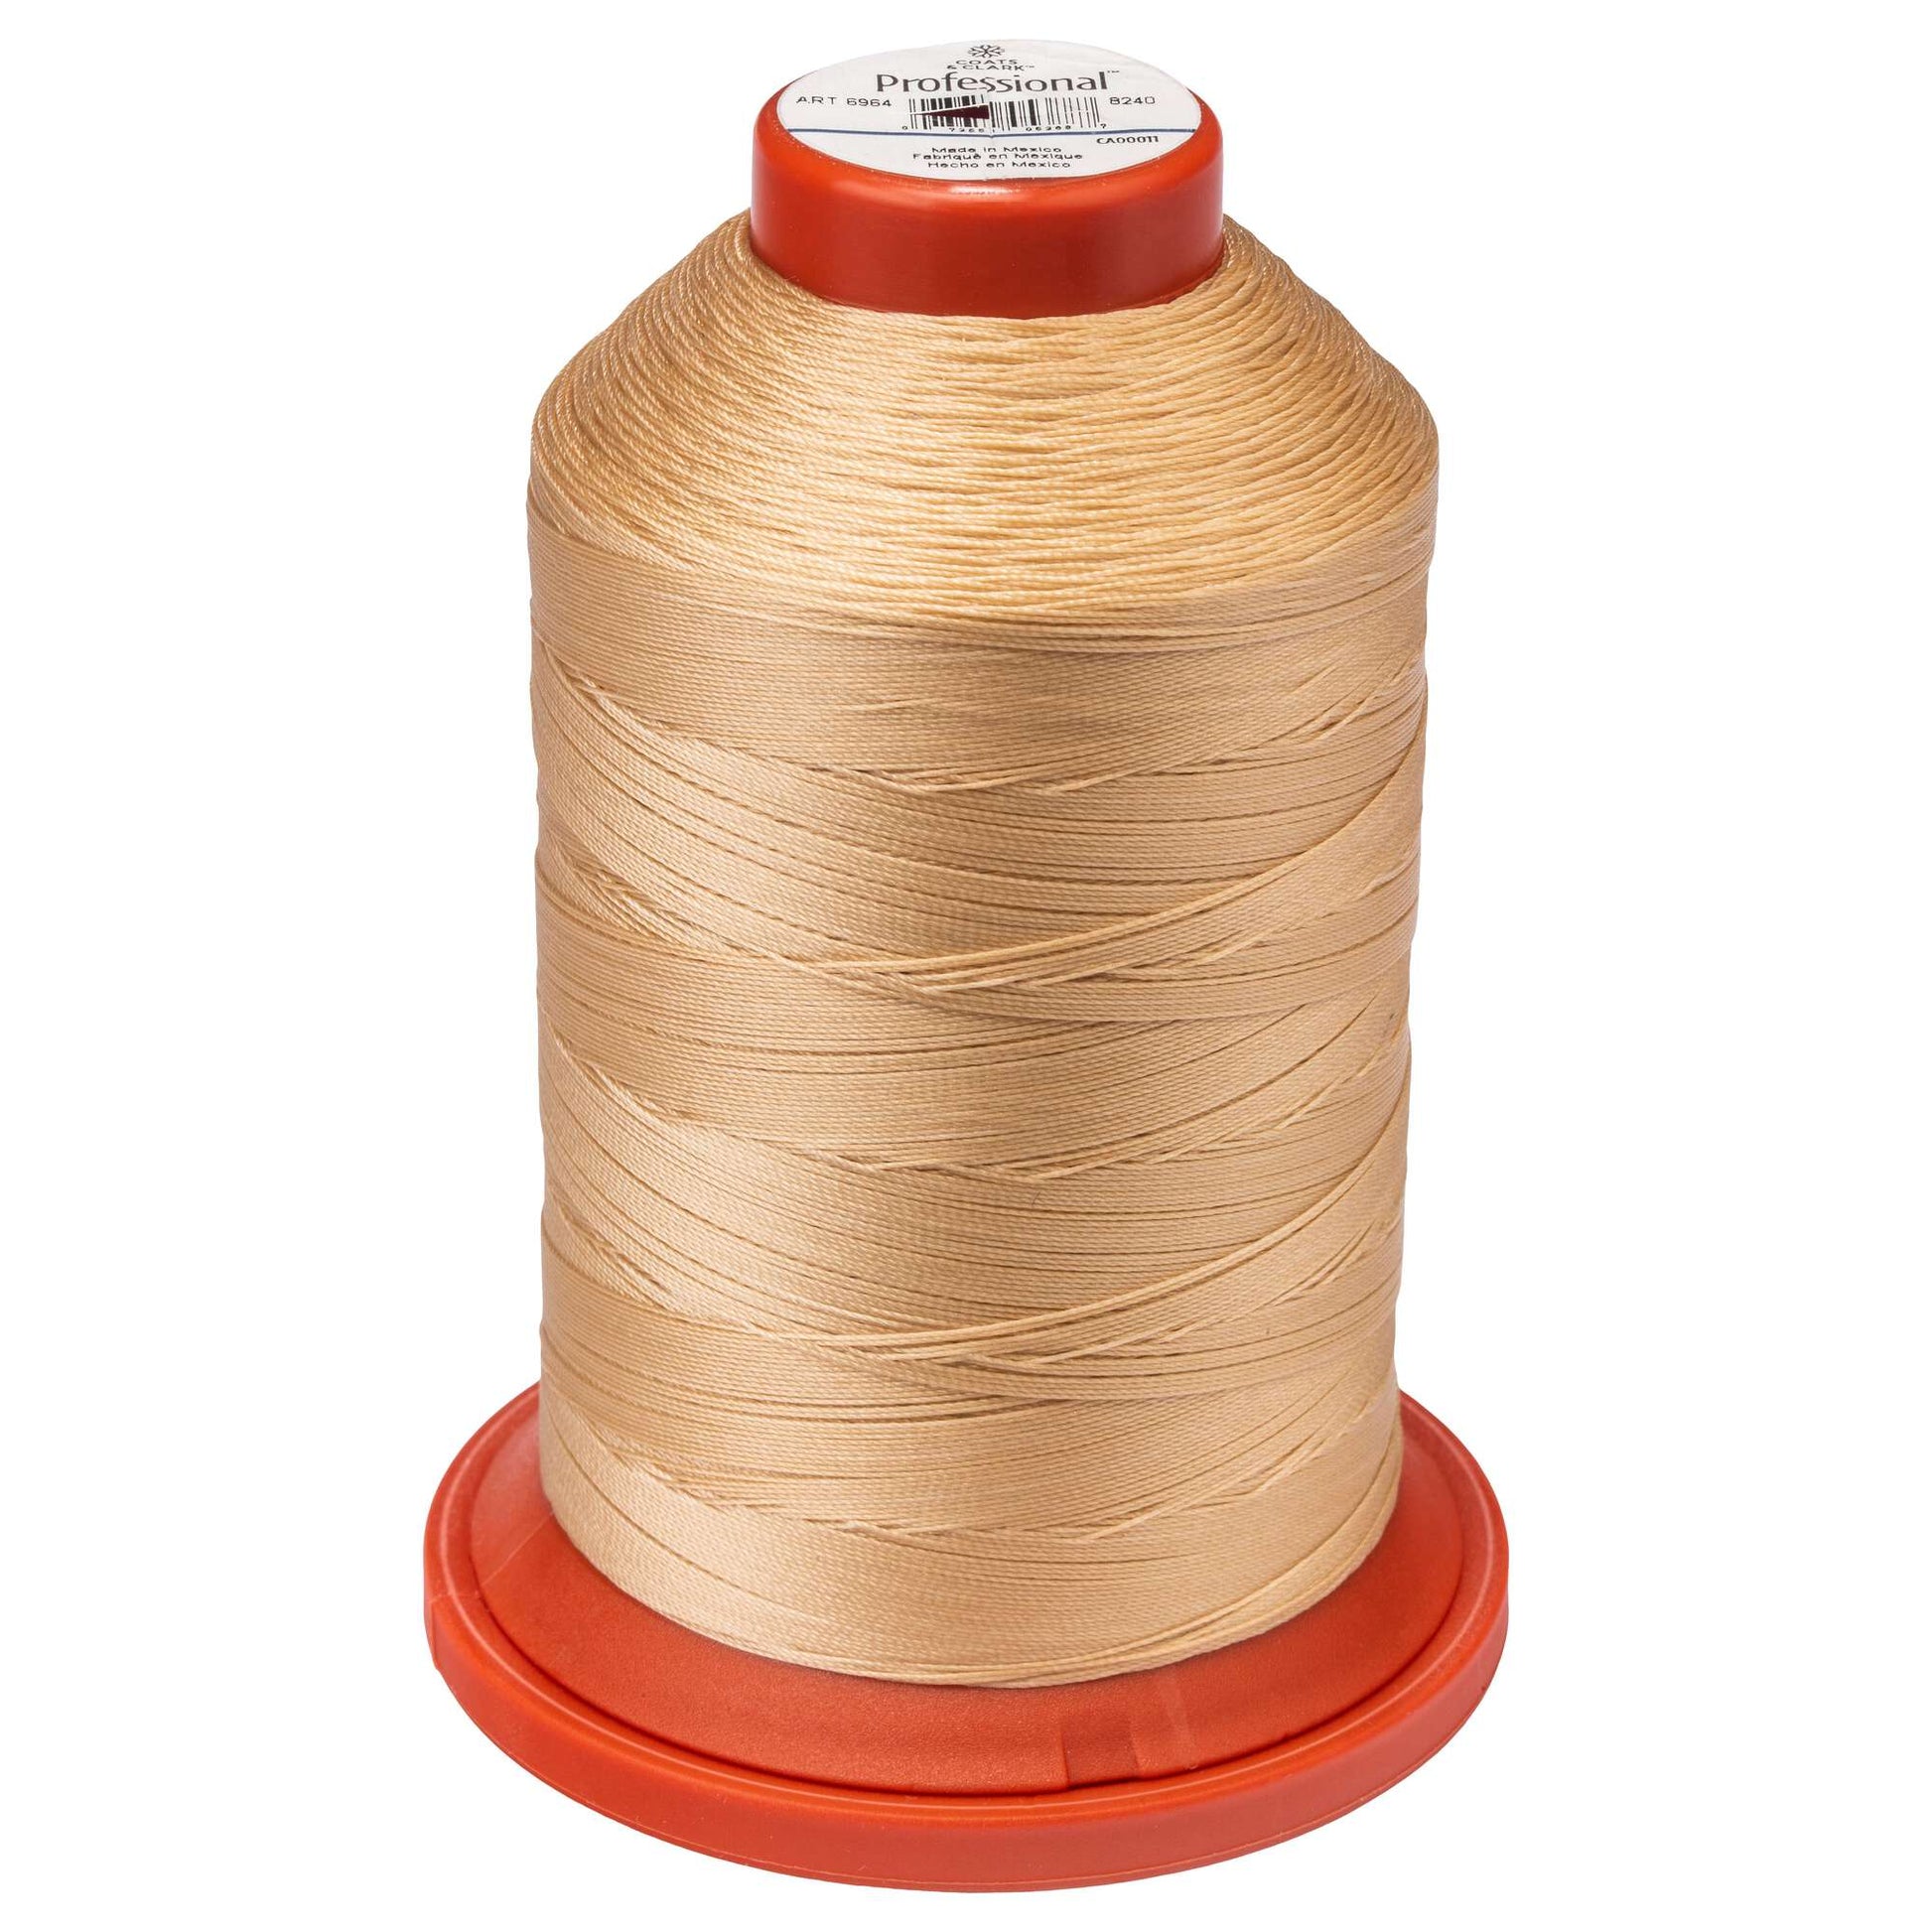 Coats Professional Upholstery Thread 1500yd Natural